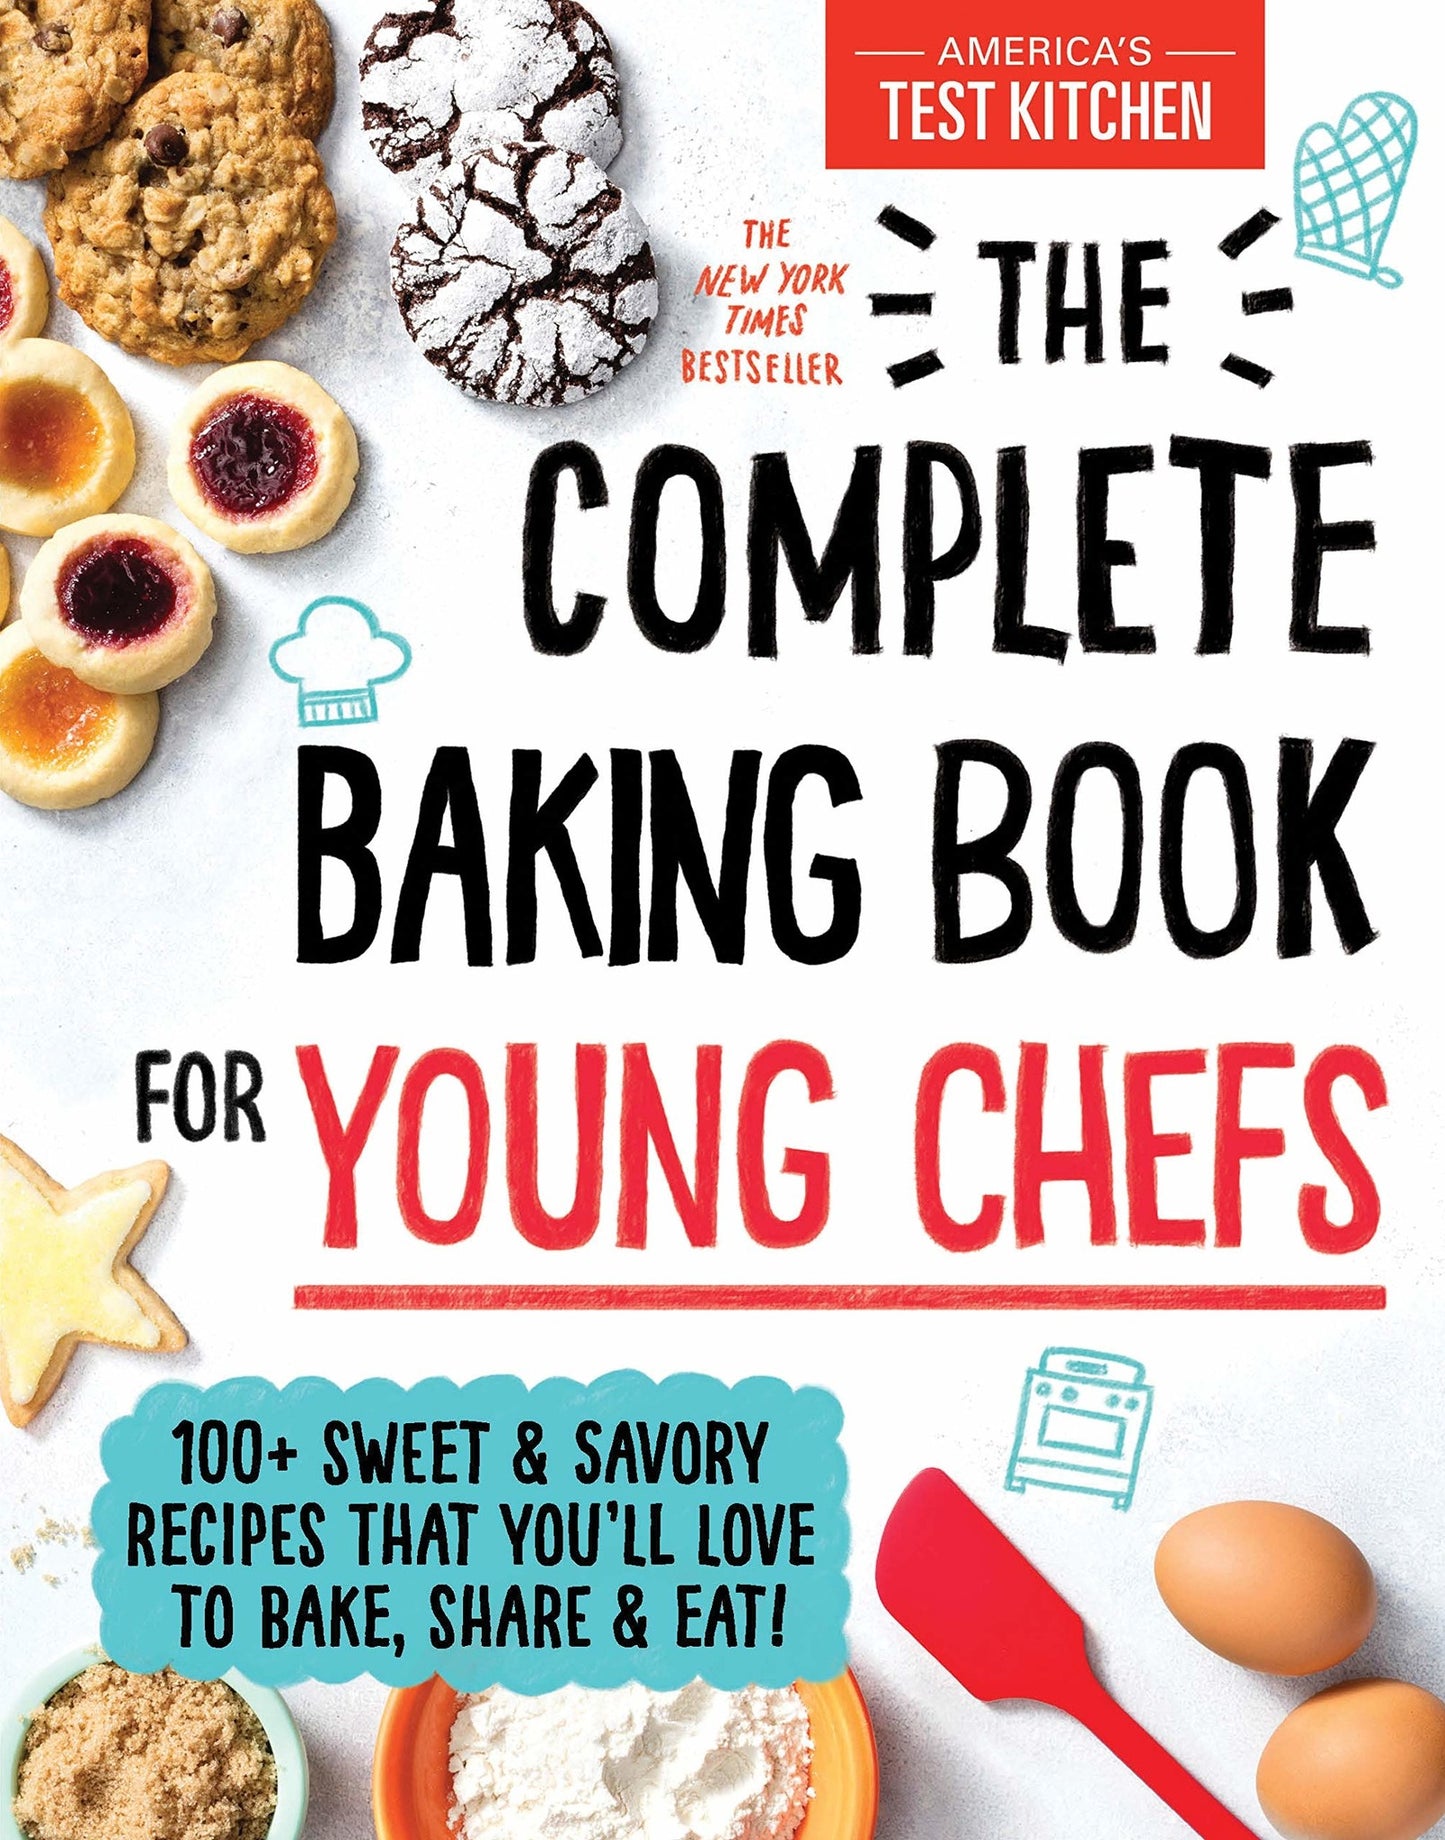 Complete Baking Book for Young Chefs - ATK